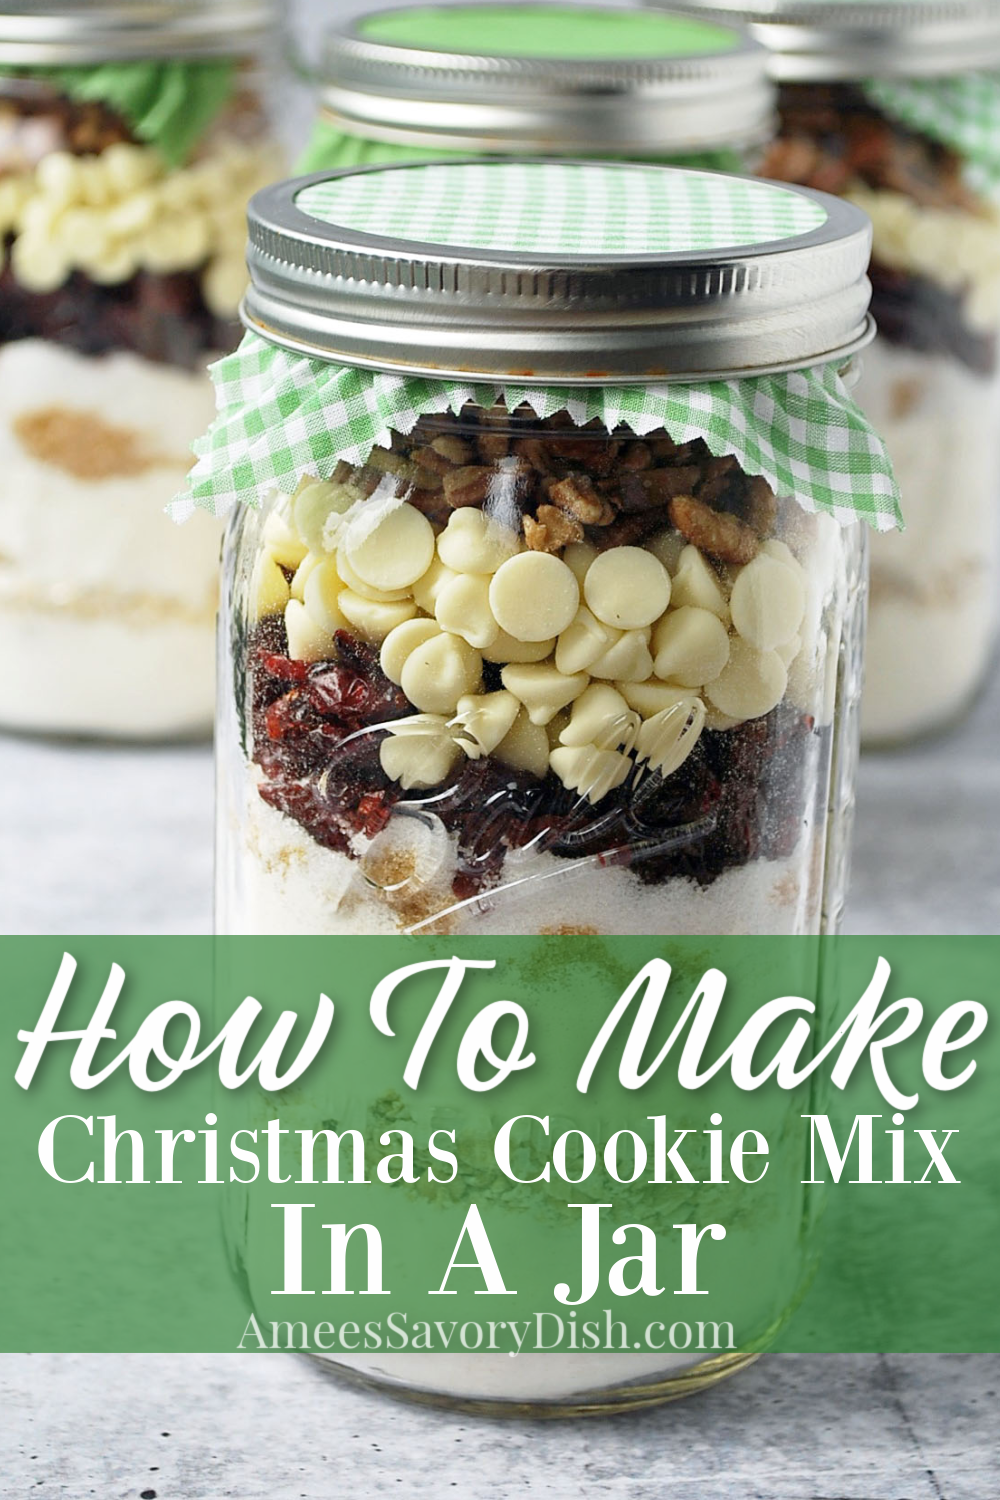 Christmas Cookie Mix In A Jar Recipes - Amee's Savory Dish